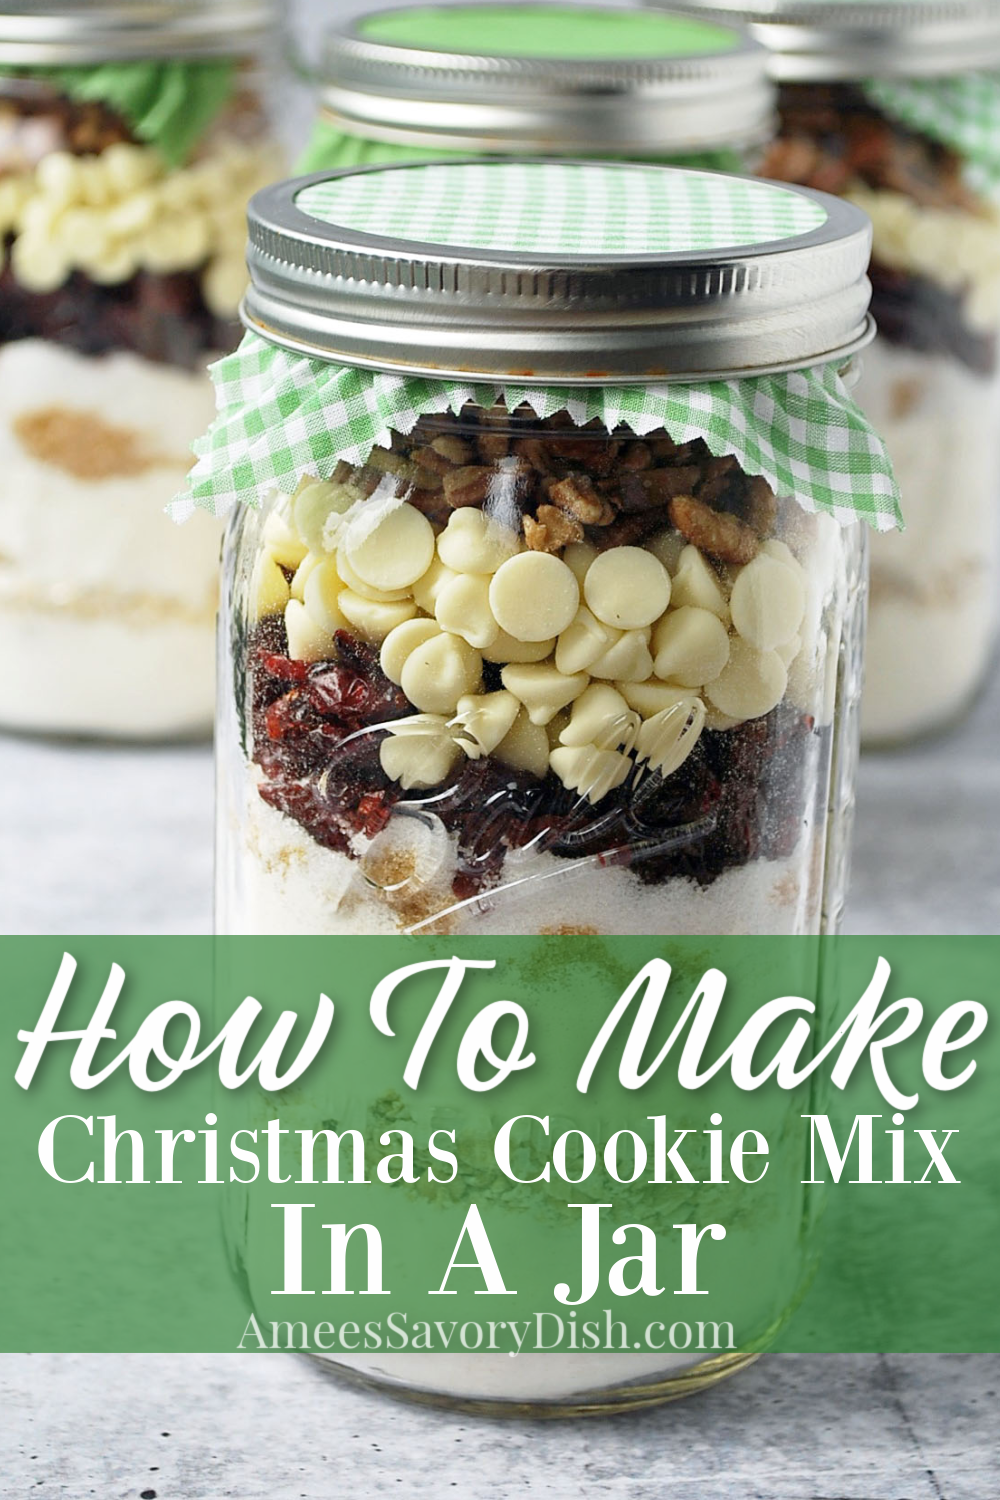 Christmas Cookie Mix In A Jar Recipes - Amee's Savory Dish